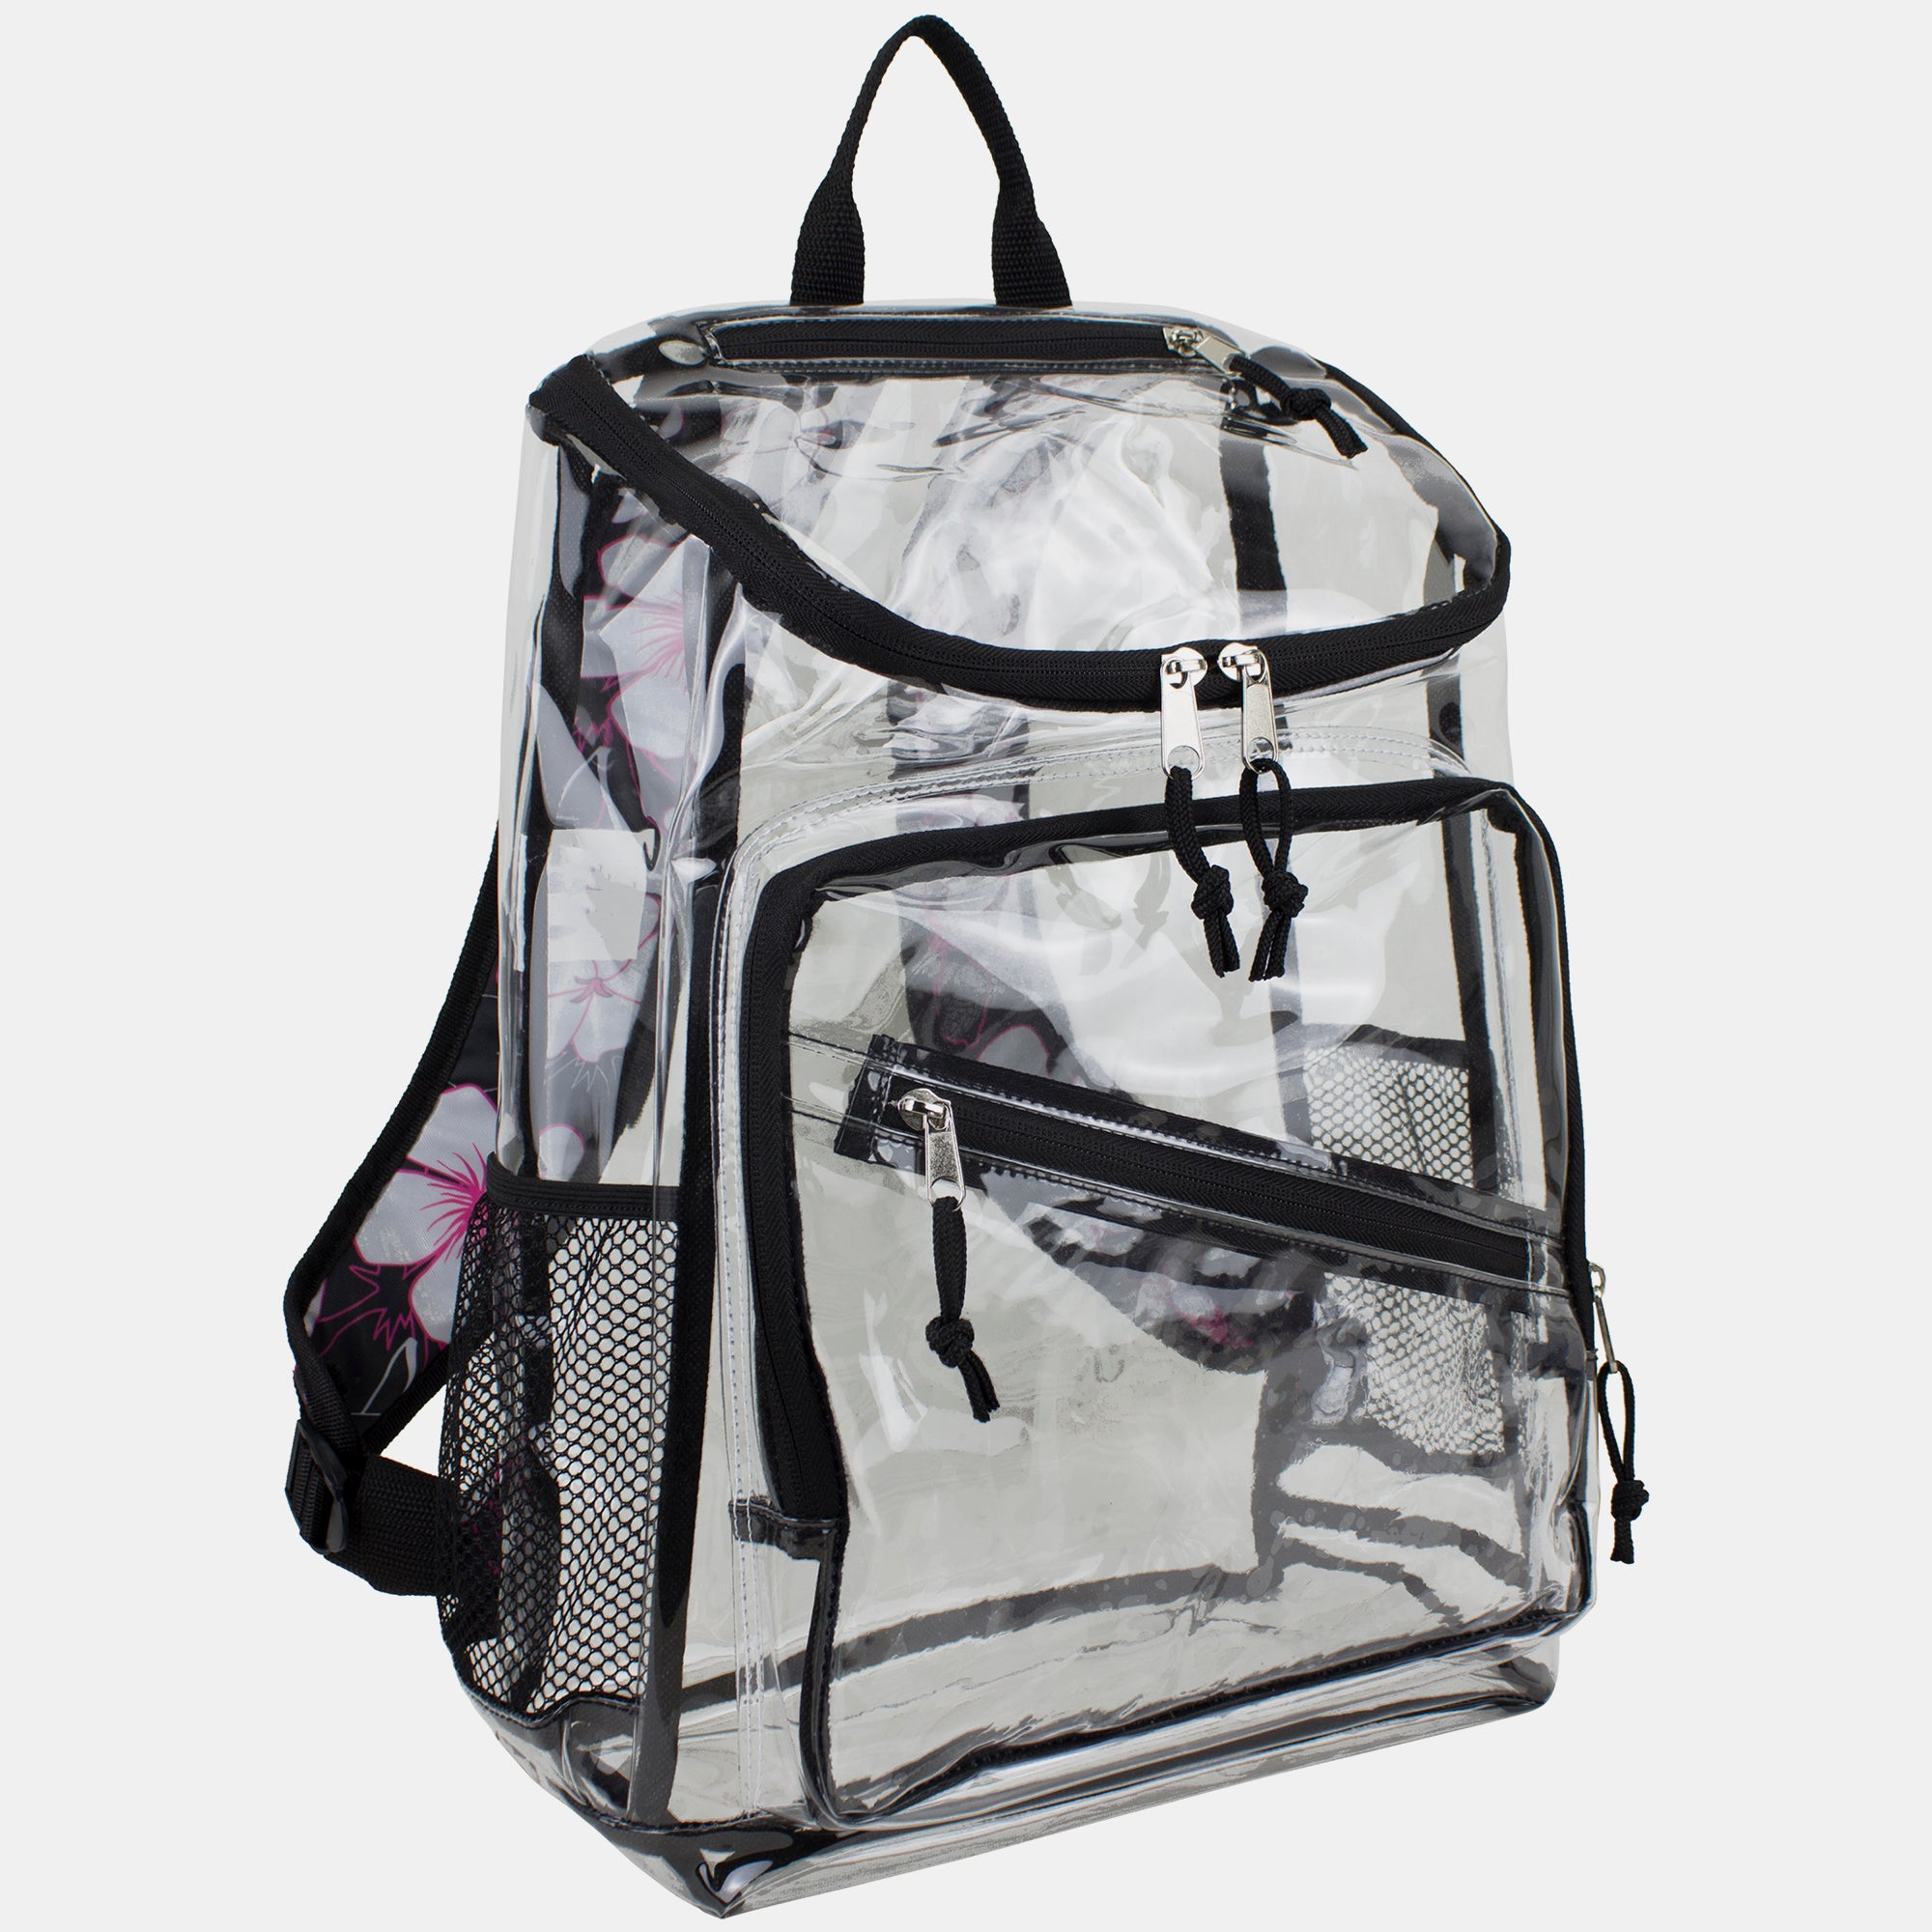 Eastsport Durable Clear Top Loader Backpack with Adjustable Colorful S